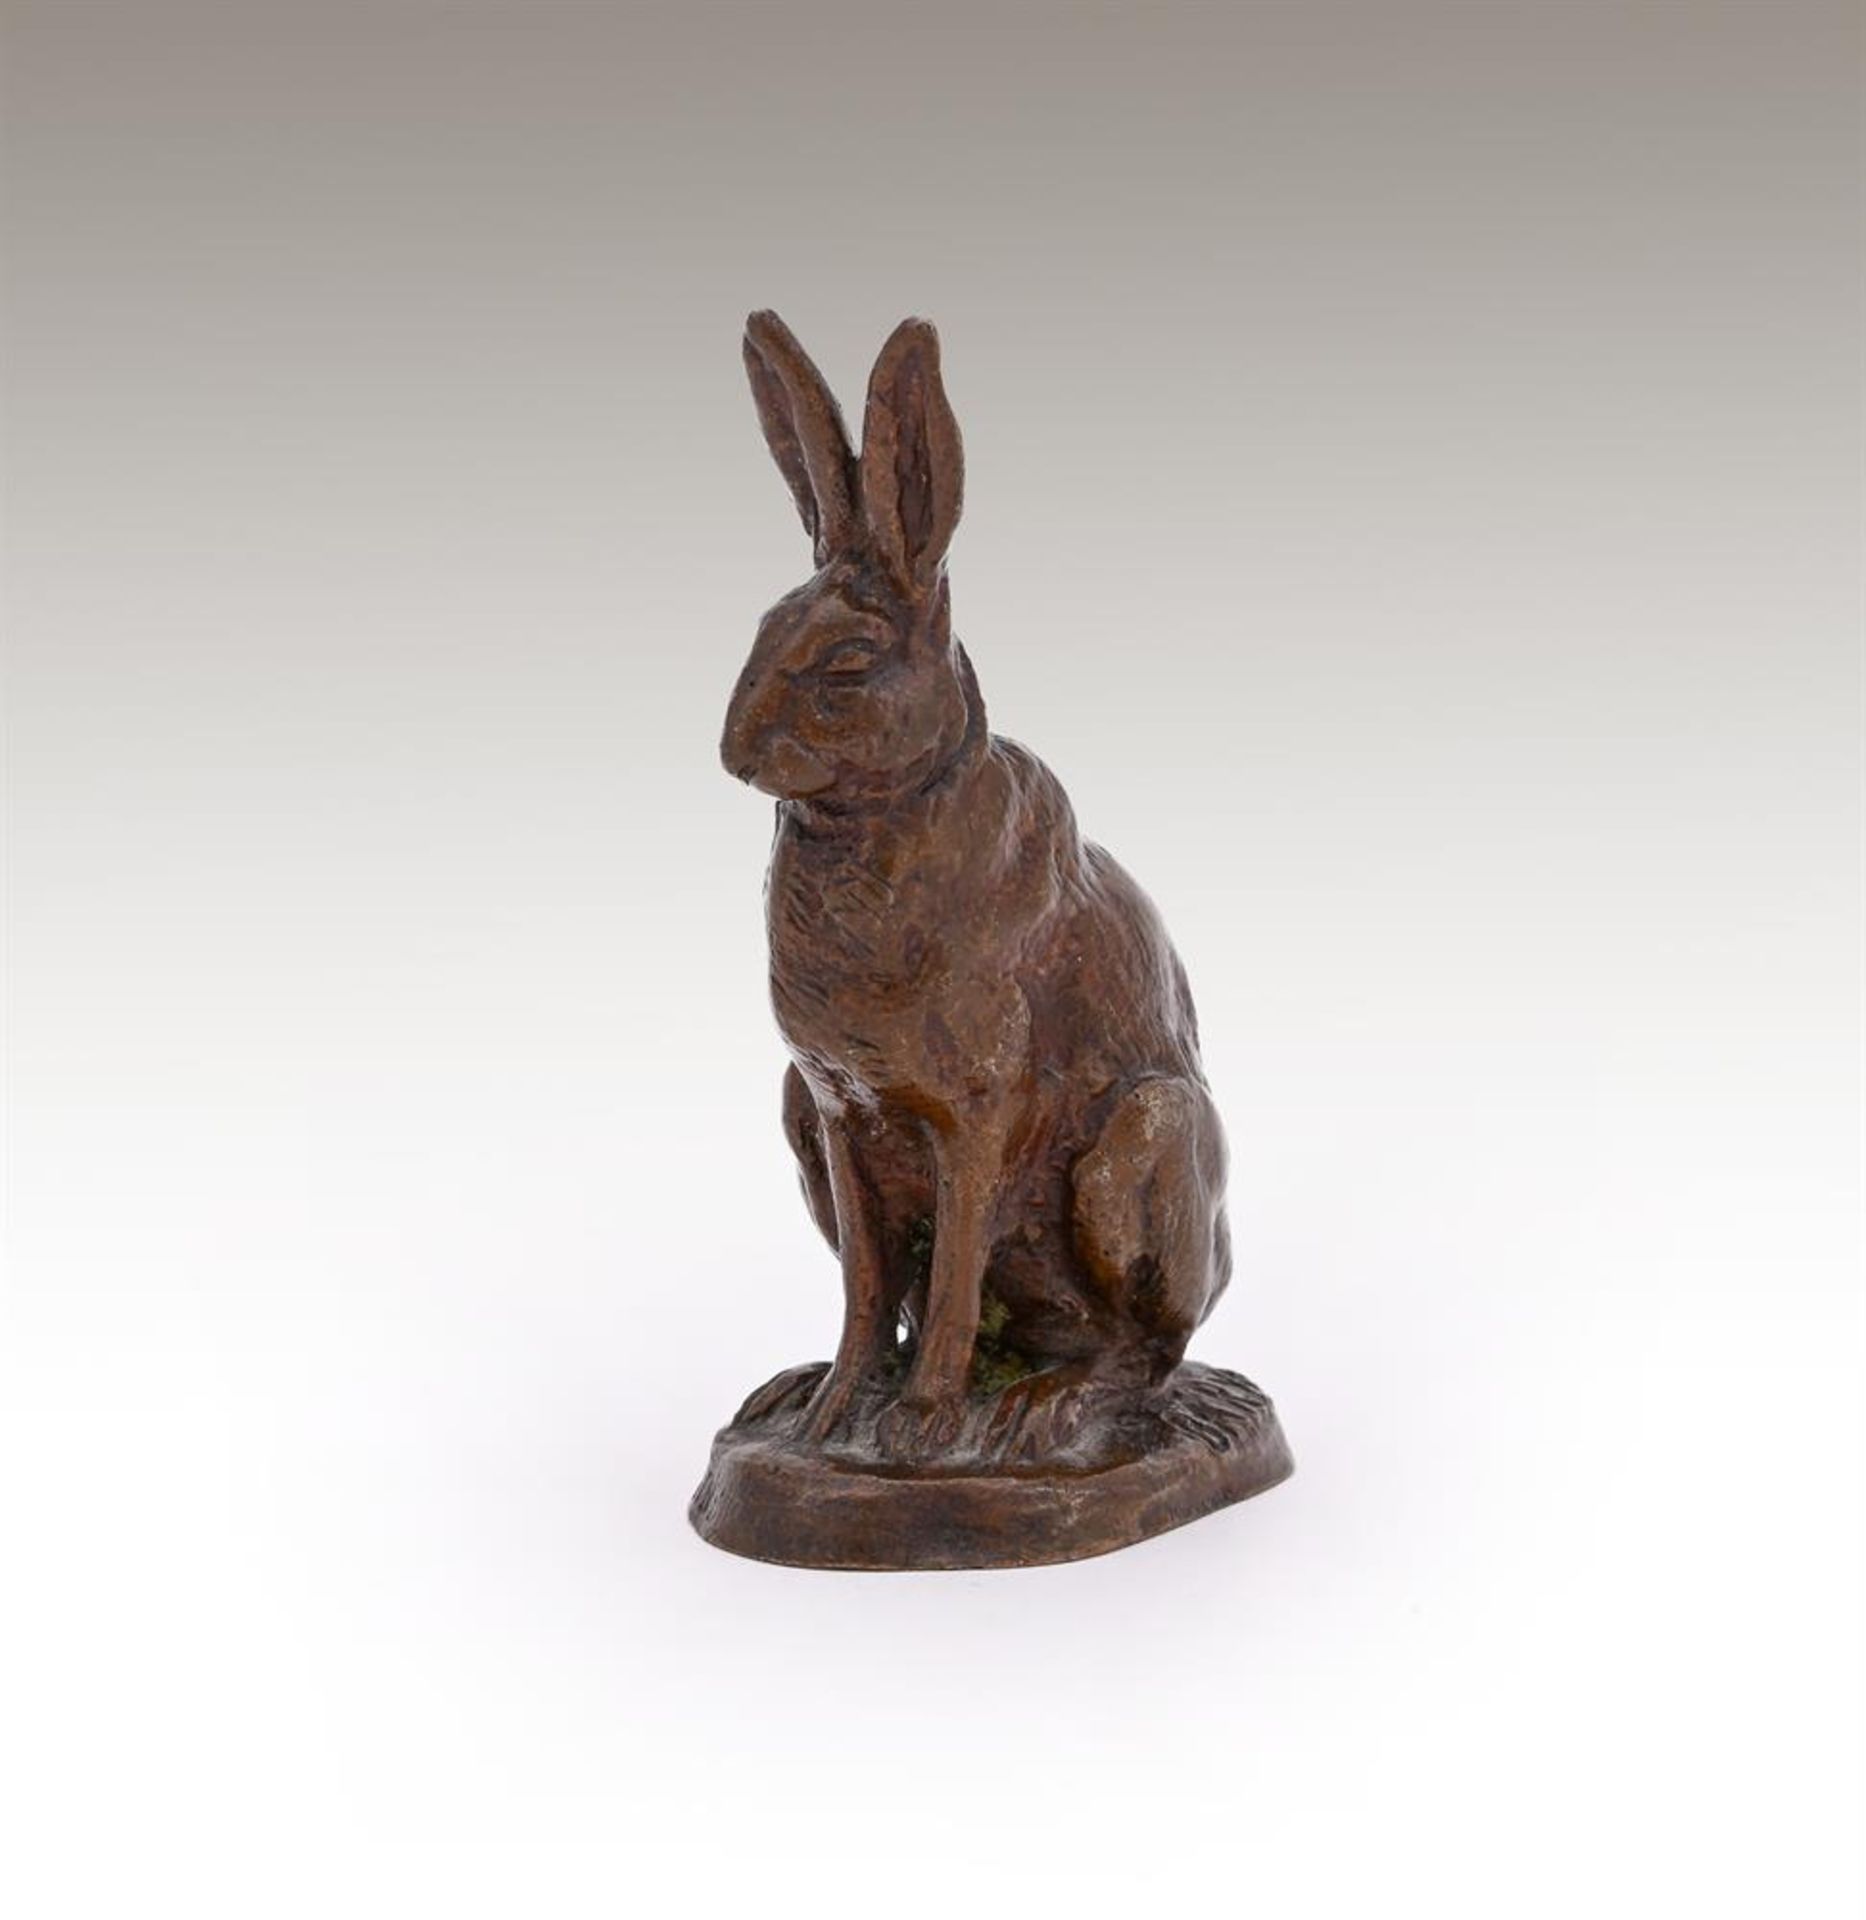 ANTOINE-LOUIS BARYE (FRENCH, 1795-1875), A BRONZE MODEL OF A SEATED HARE - Image 4 of 4